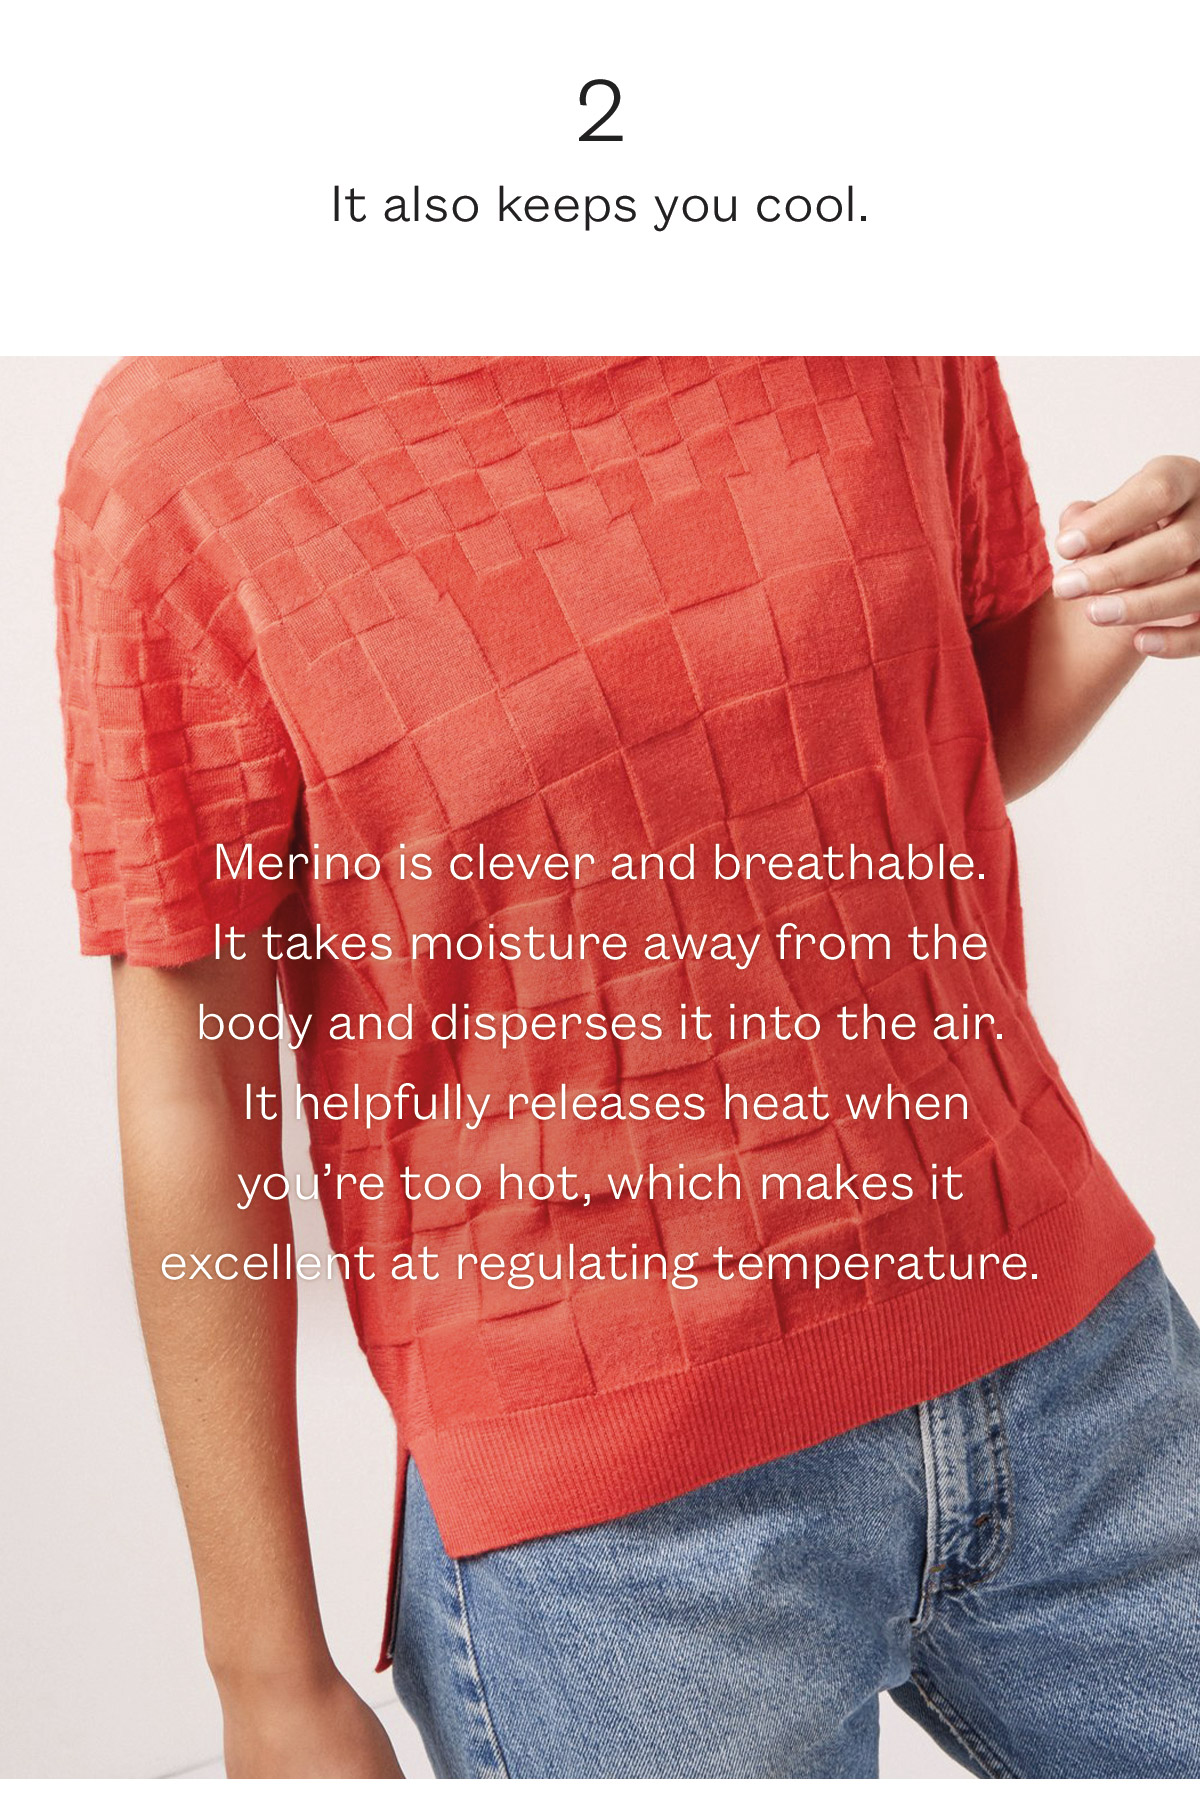 Merino is clever and breathable.  It takes moisture away from the body and disperses it into the air.  It helpfully releases heat when you're too hot, which makes it excellent at regulating temperature.